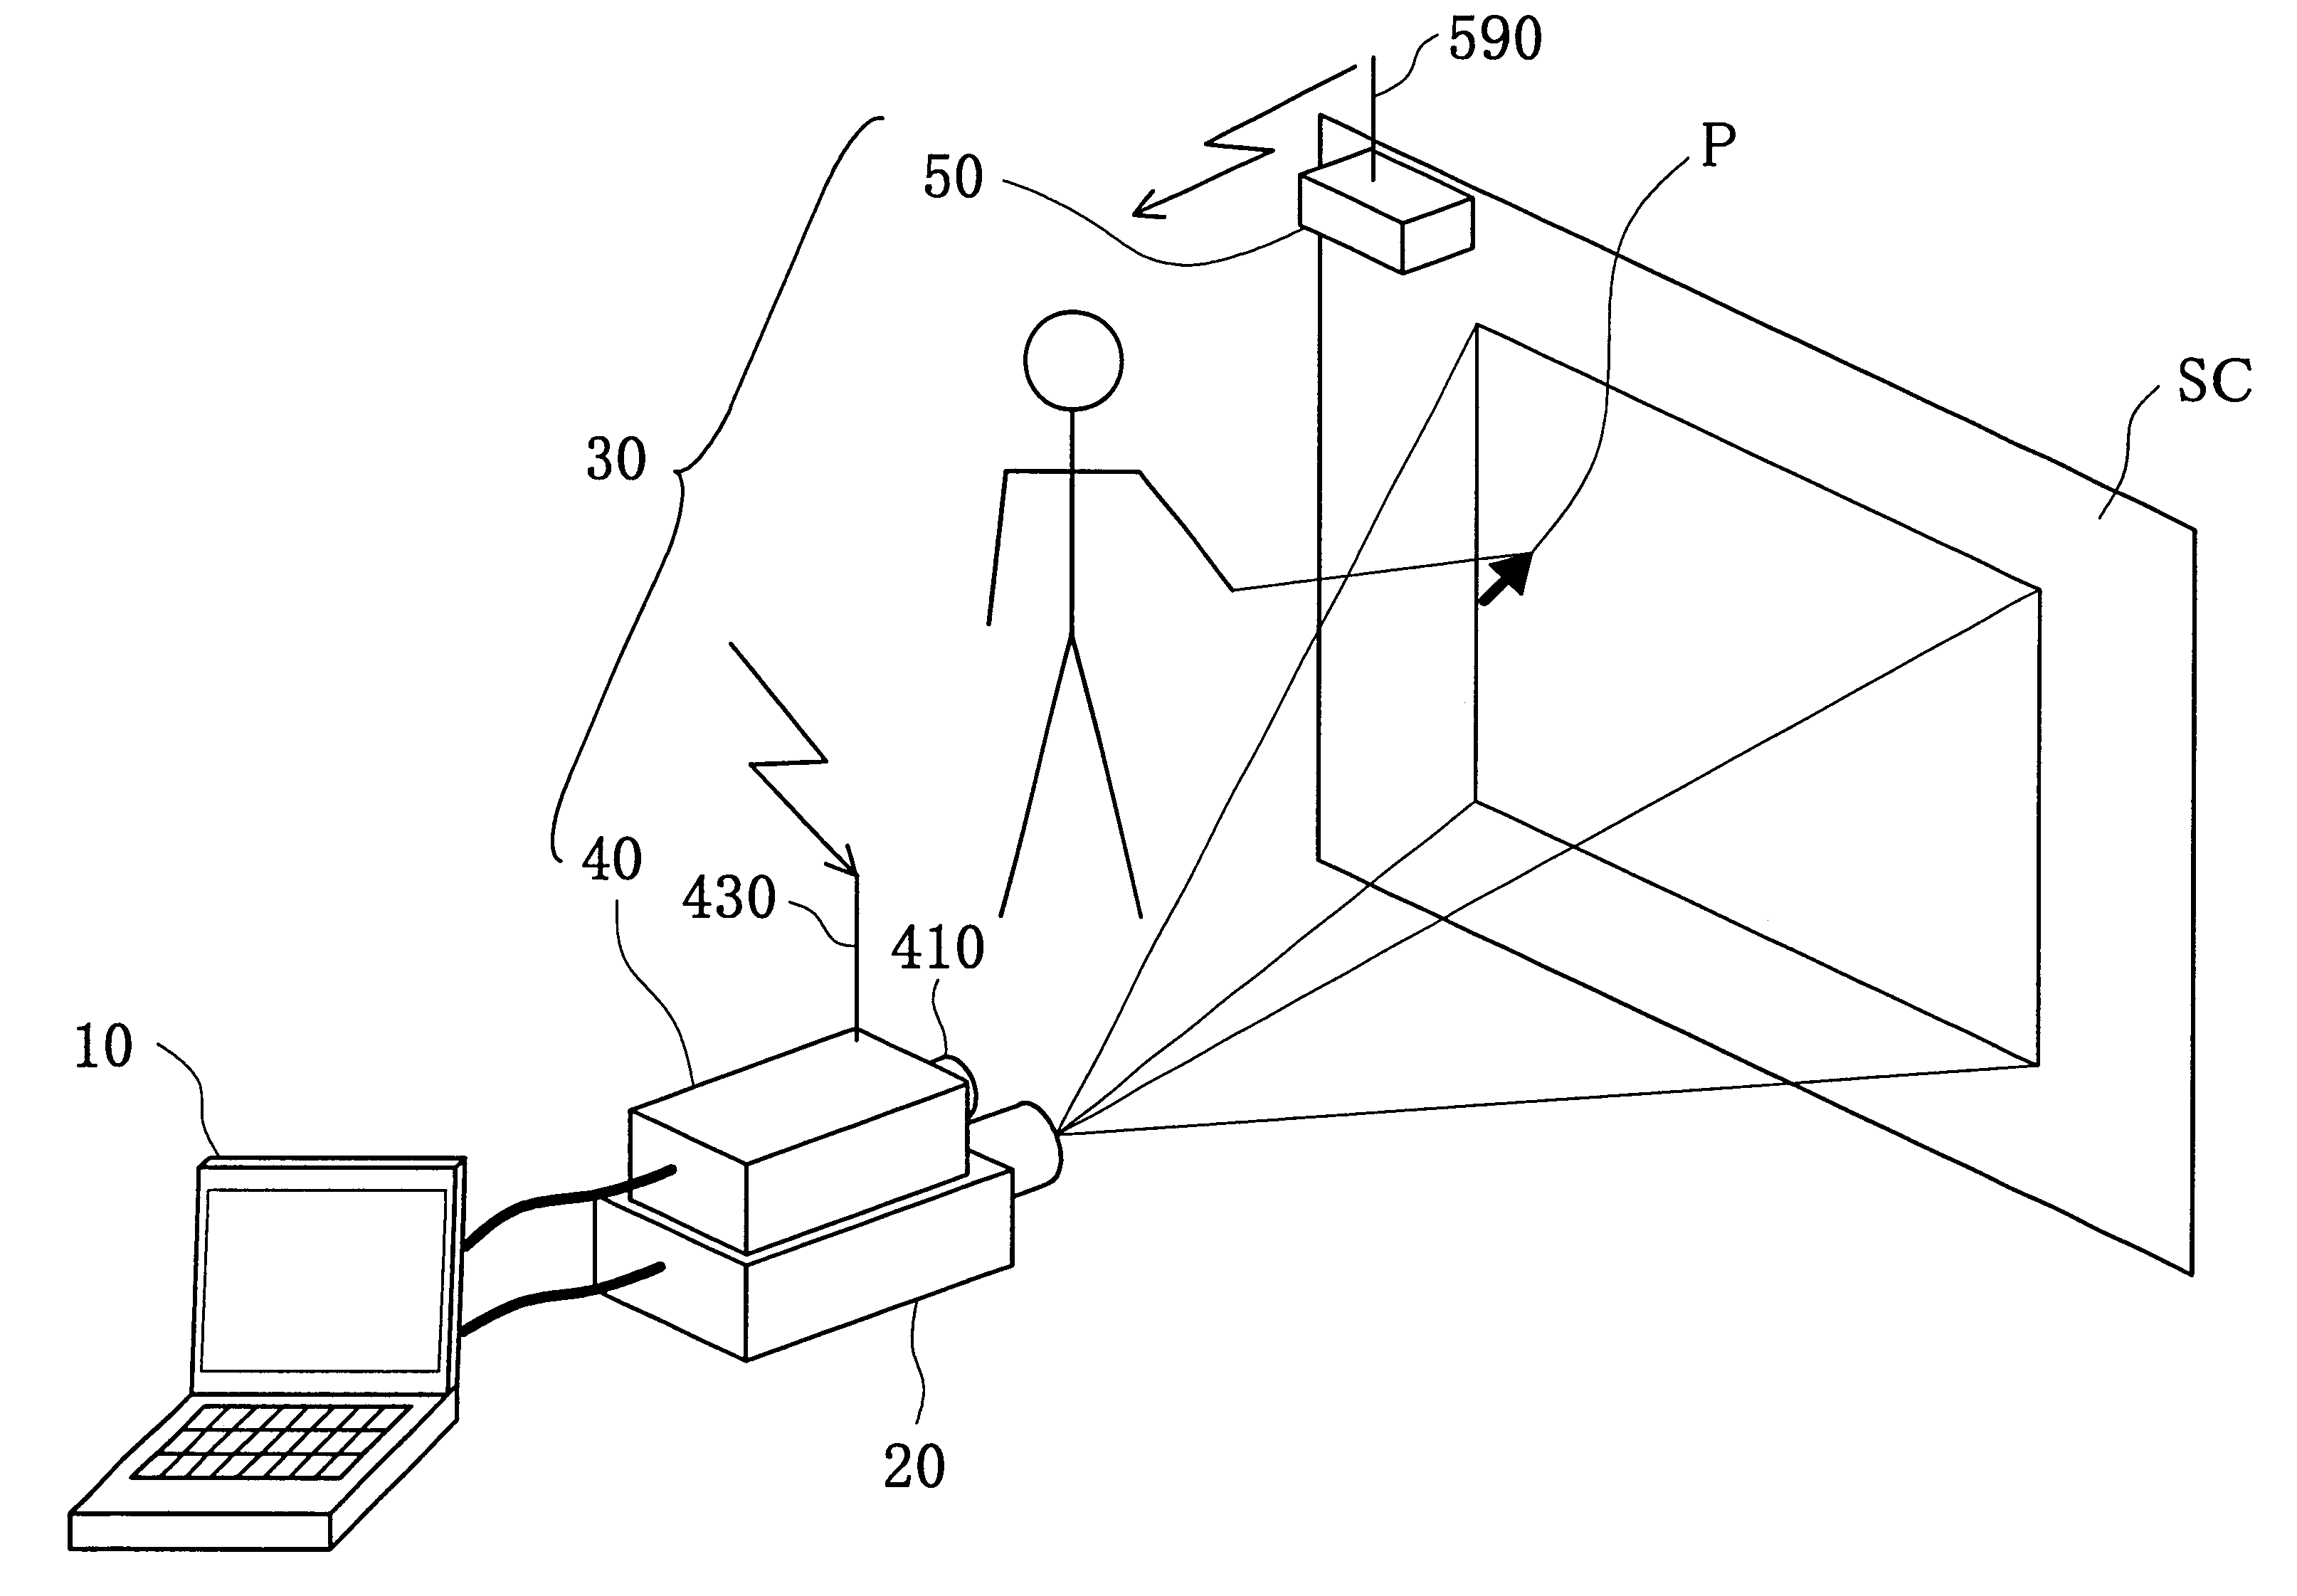 Input device using tapping sound detection